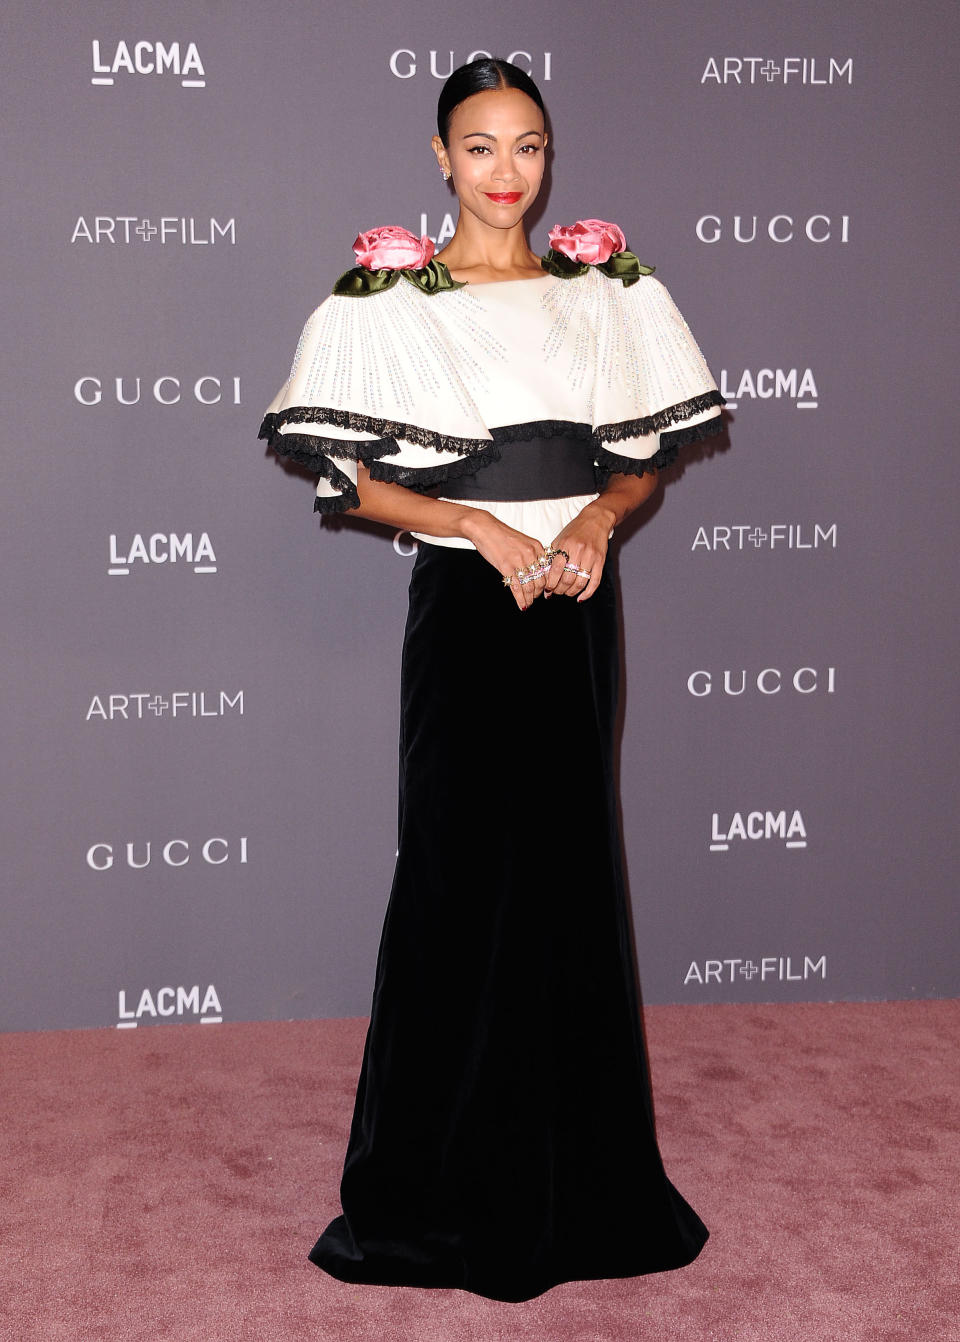 Zoe Saldana attends the 2017 LACMA Art + Film gala on Nov. 4, in Los Angeles. (Photo: Getty Images)